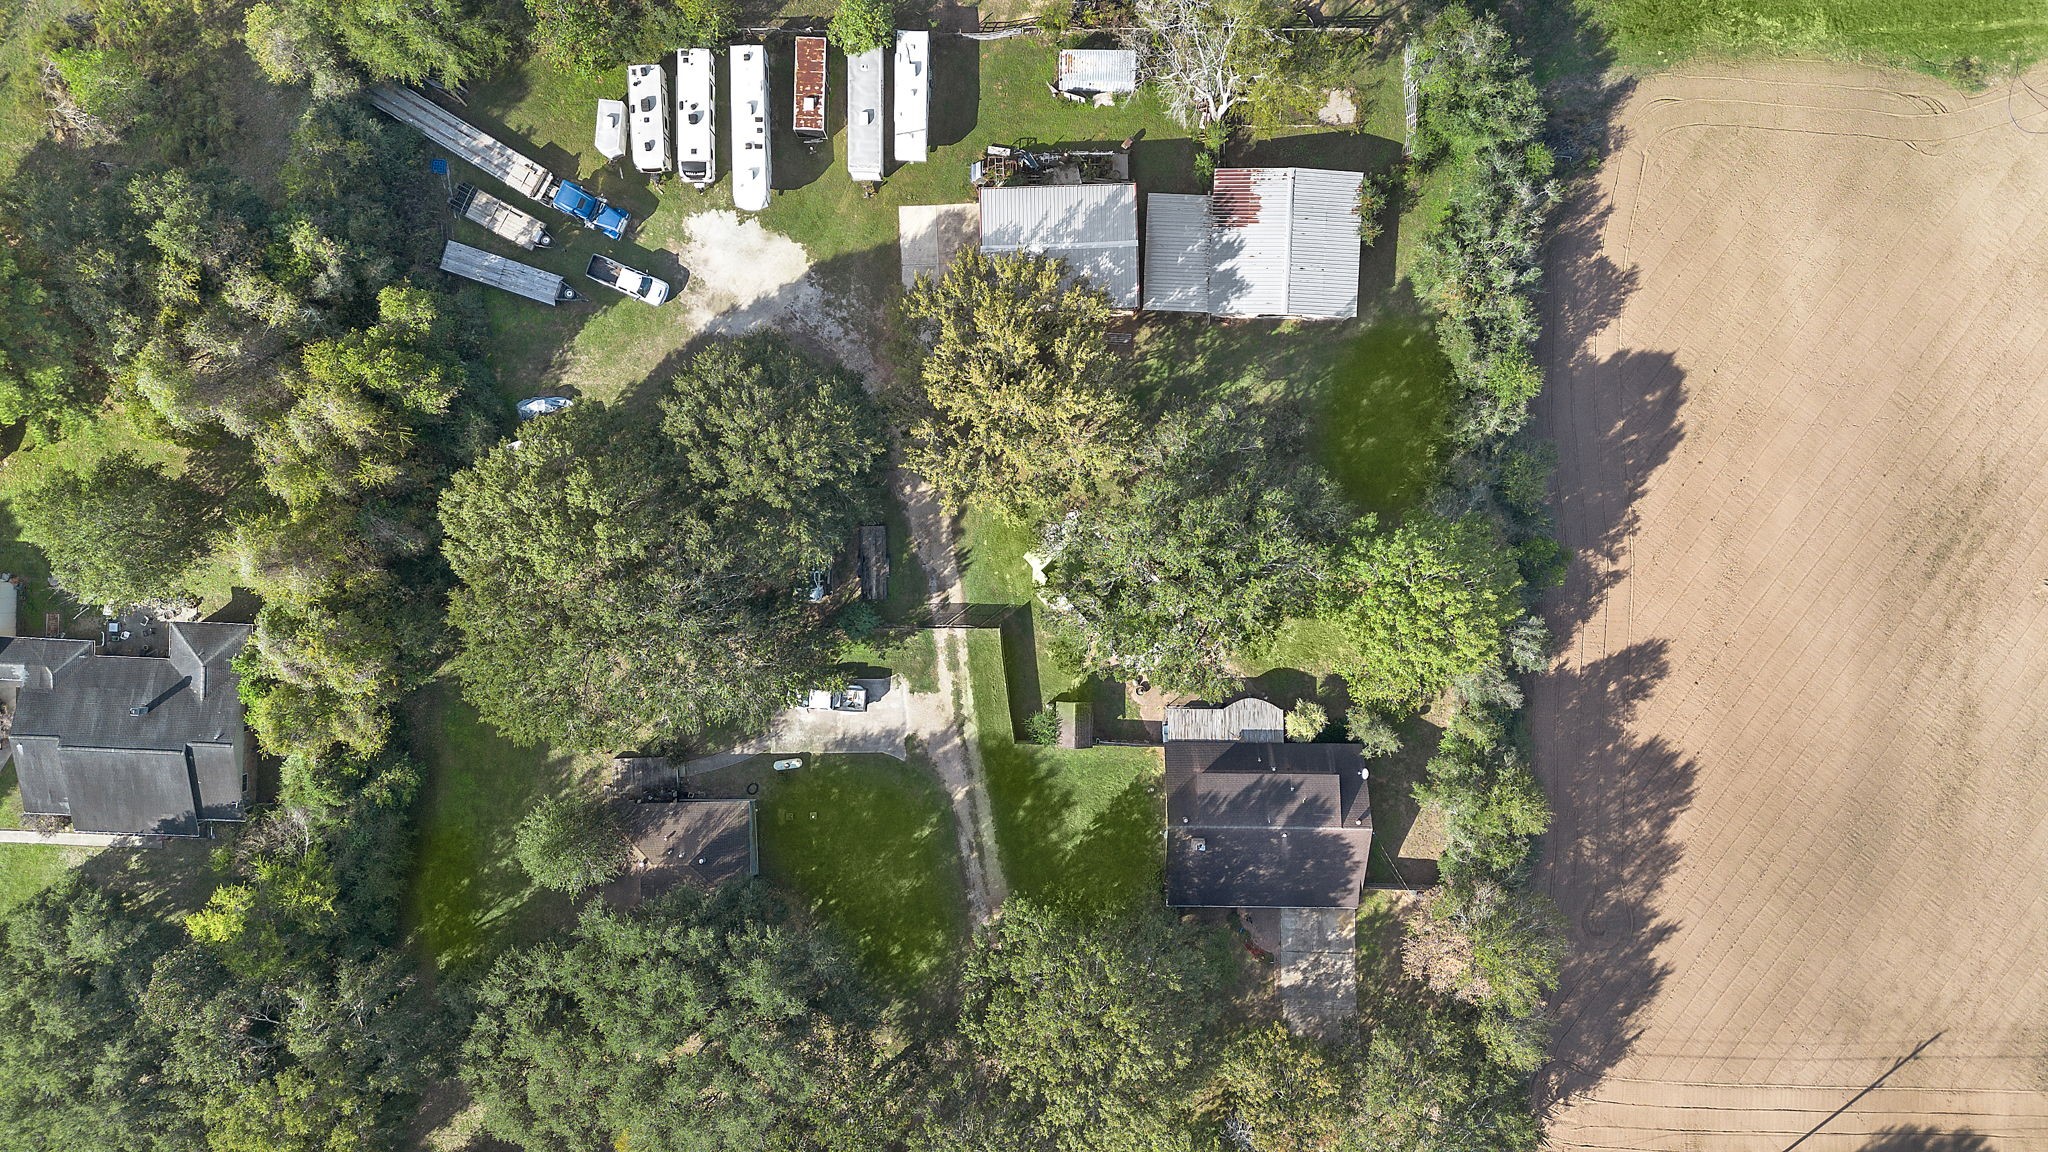 Ariel View of the 2 Acres. 2 Homes, Metal Shop, Barn